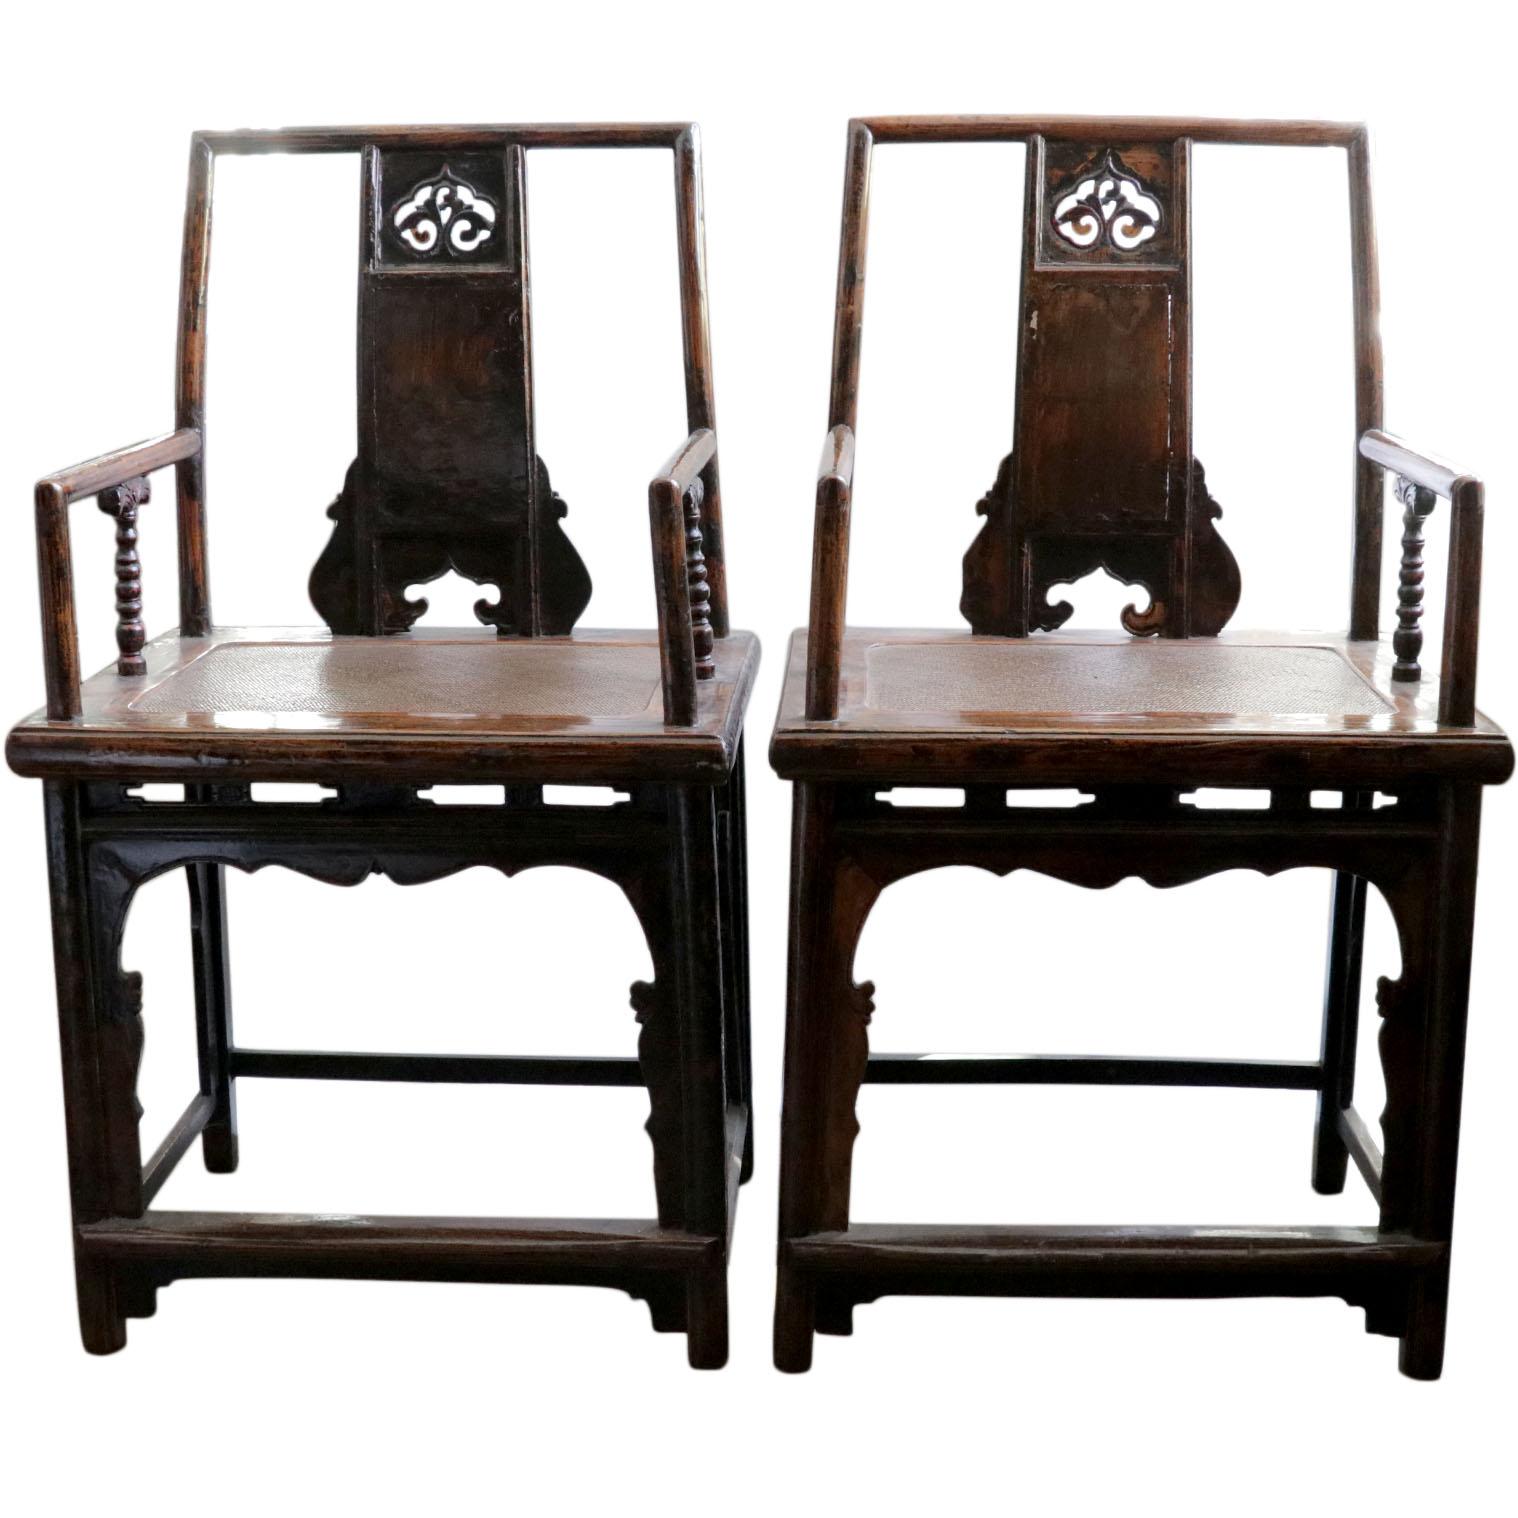 Pair of antique Chinese high chairs with a seat area of 18.5